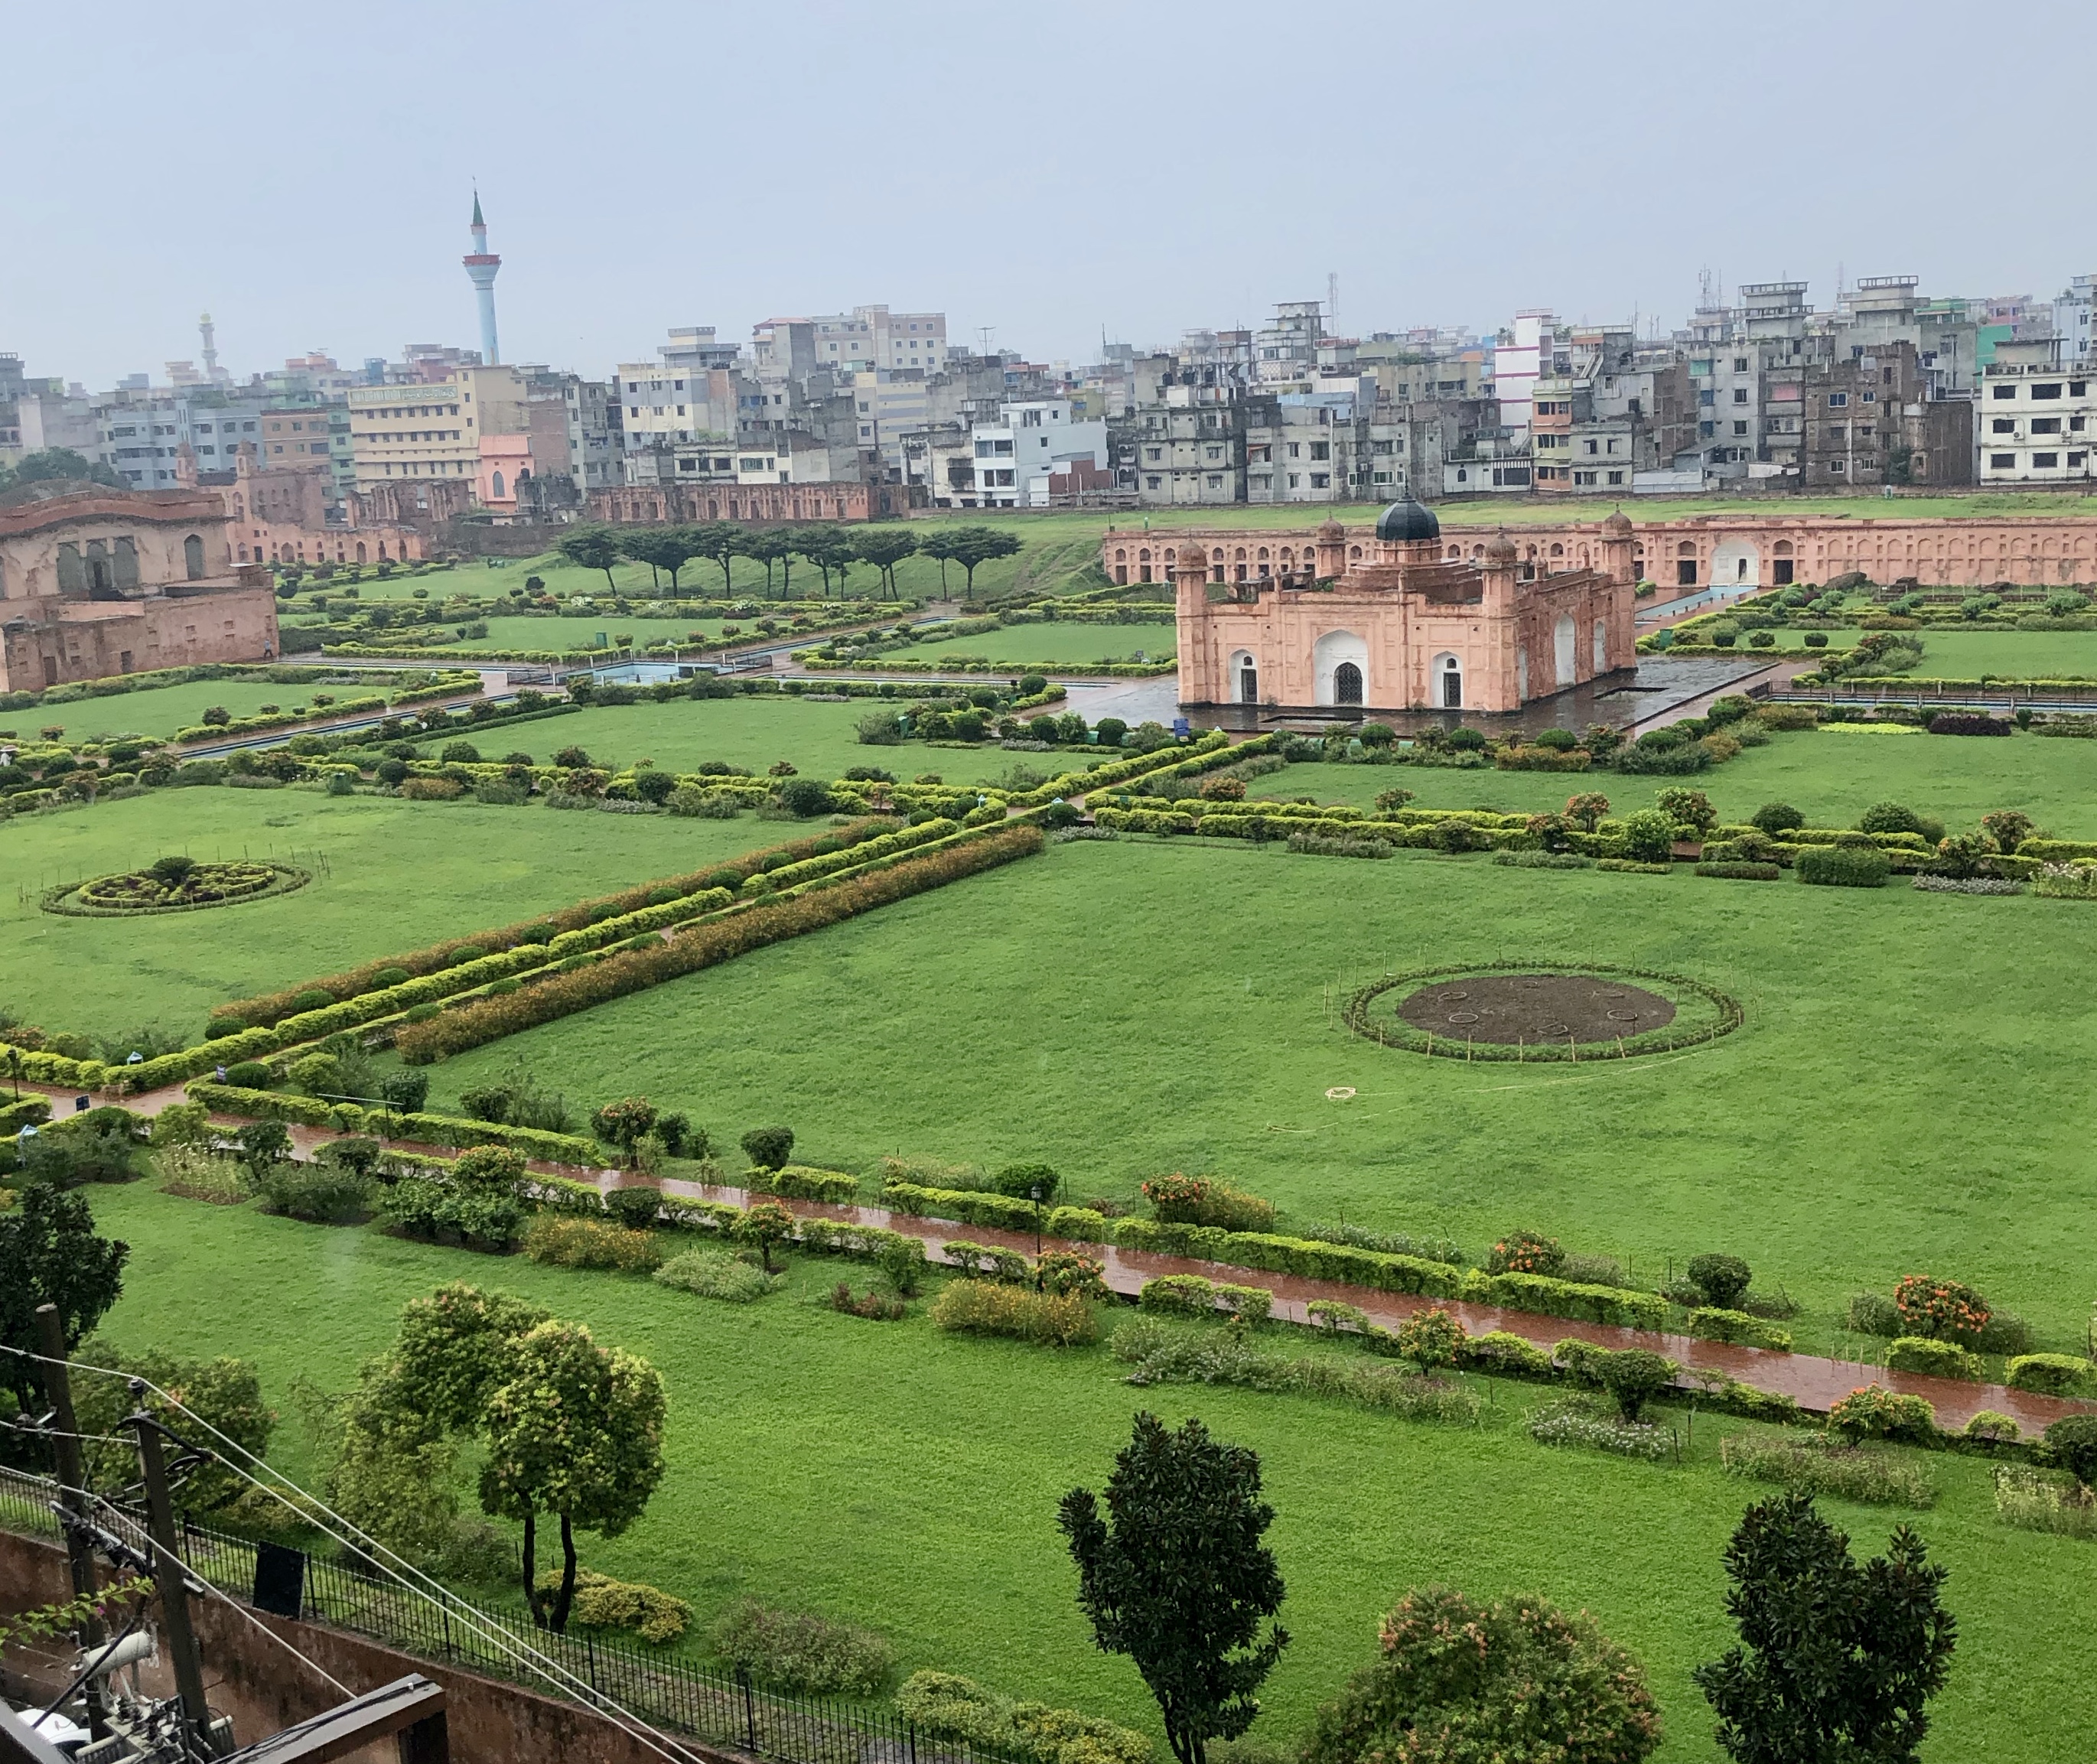 Lalbagh Fort